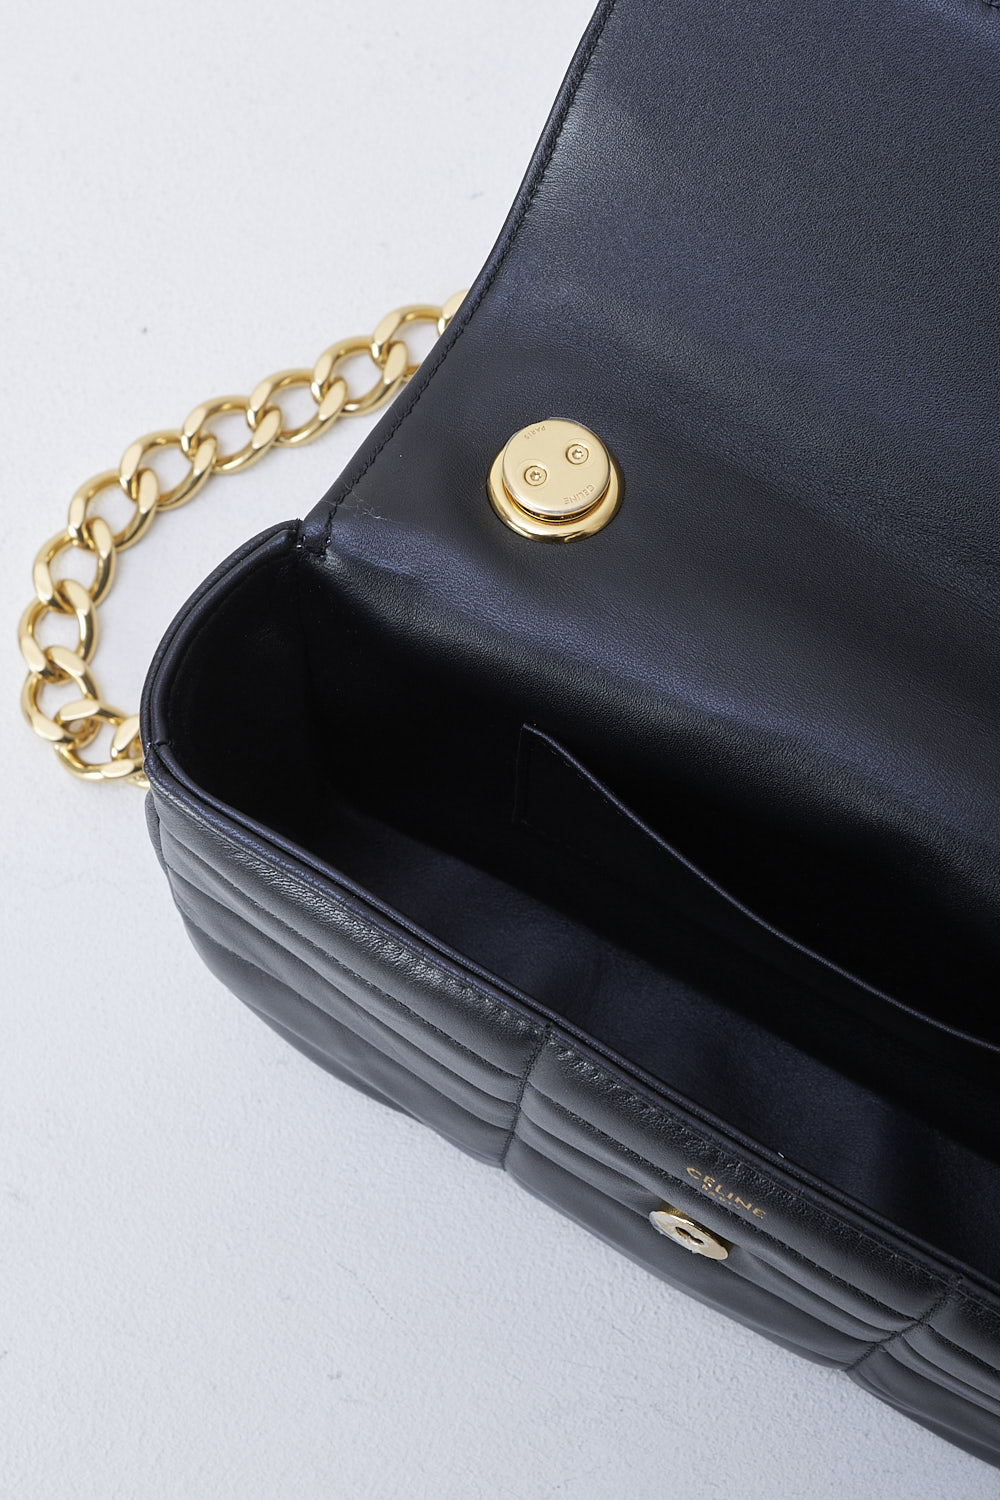 CELINE, BLACK MATELASSÃ‰ SHOULDER BAG WITH GOLD CHAIN, 111273EPZ_38NO, Black, Detail 1, This black matelassÃ© shoulder bag has gold-tone metal hardware with the brand's lettering on the front and a gold chain shoulder strap. The bag has a snap button closure. The flap opens to the main compartment with a inner pocket to the backside


